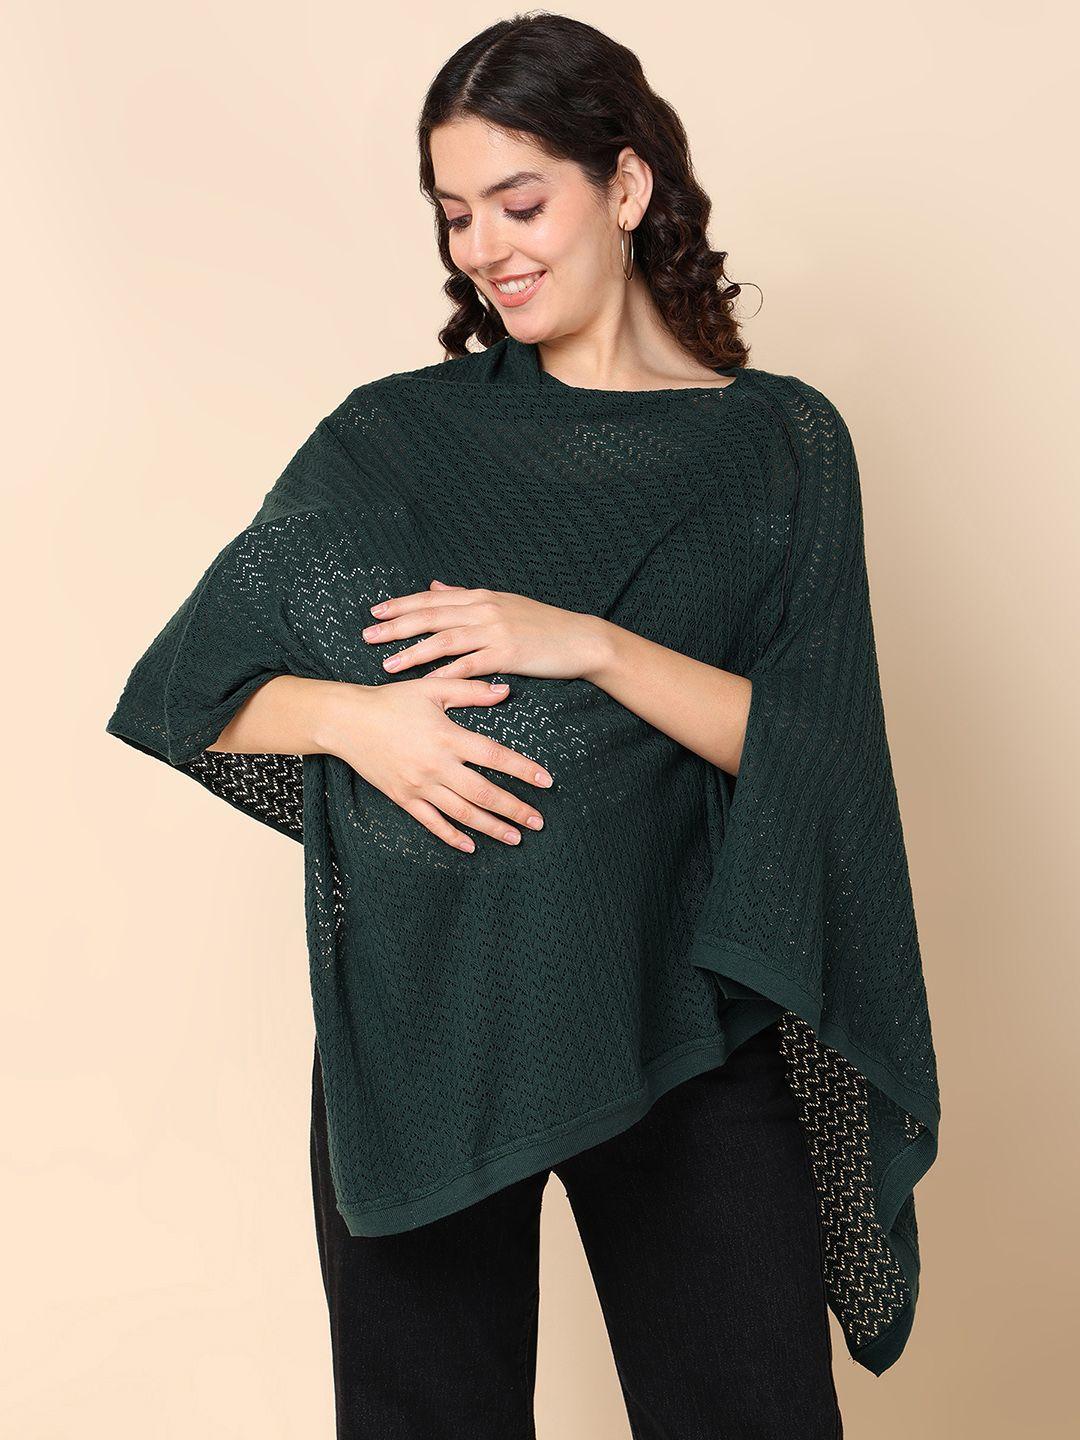 house of zelena open knit self design maternity poncho sweater